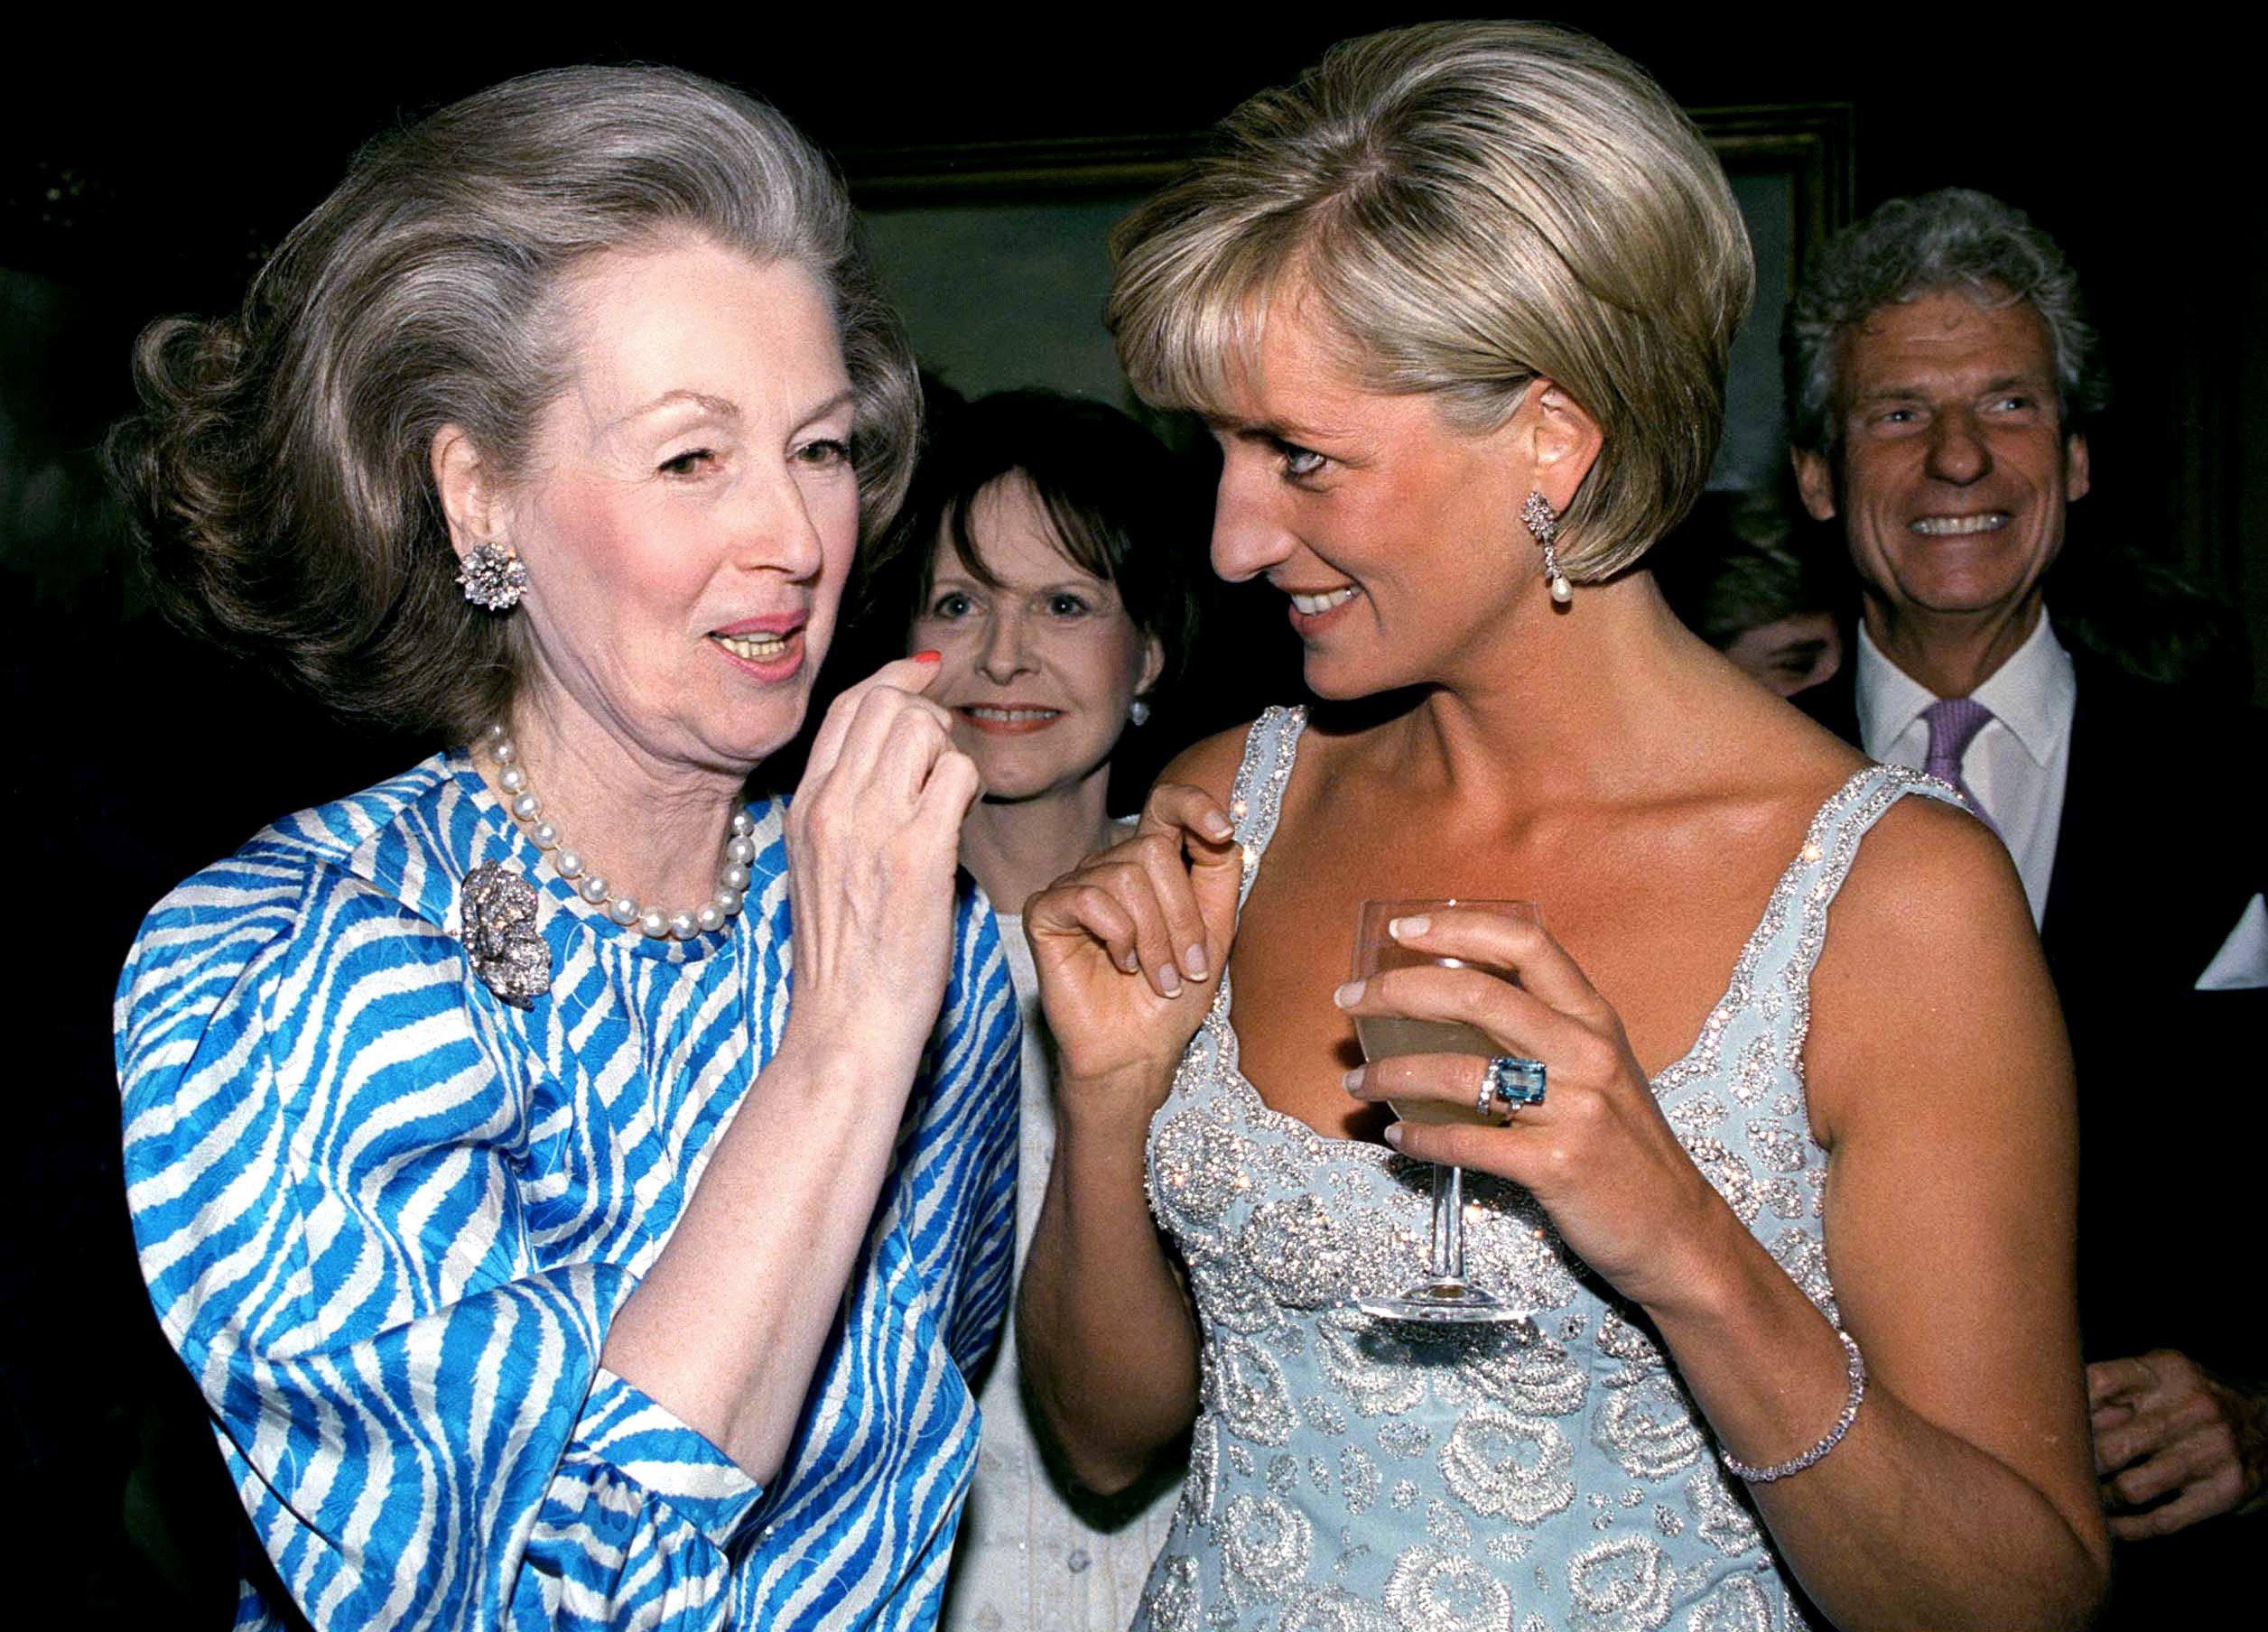 Raine, Comtesse De Chambrun and Princess Diana at a private viewing and reception at Christie's on June 2, 1997. | Source: Tim Graham Photo Library/Getty Images